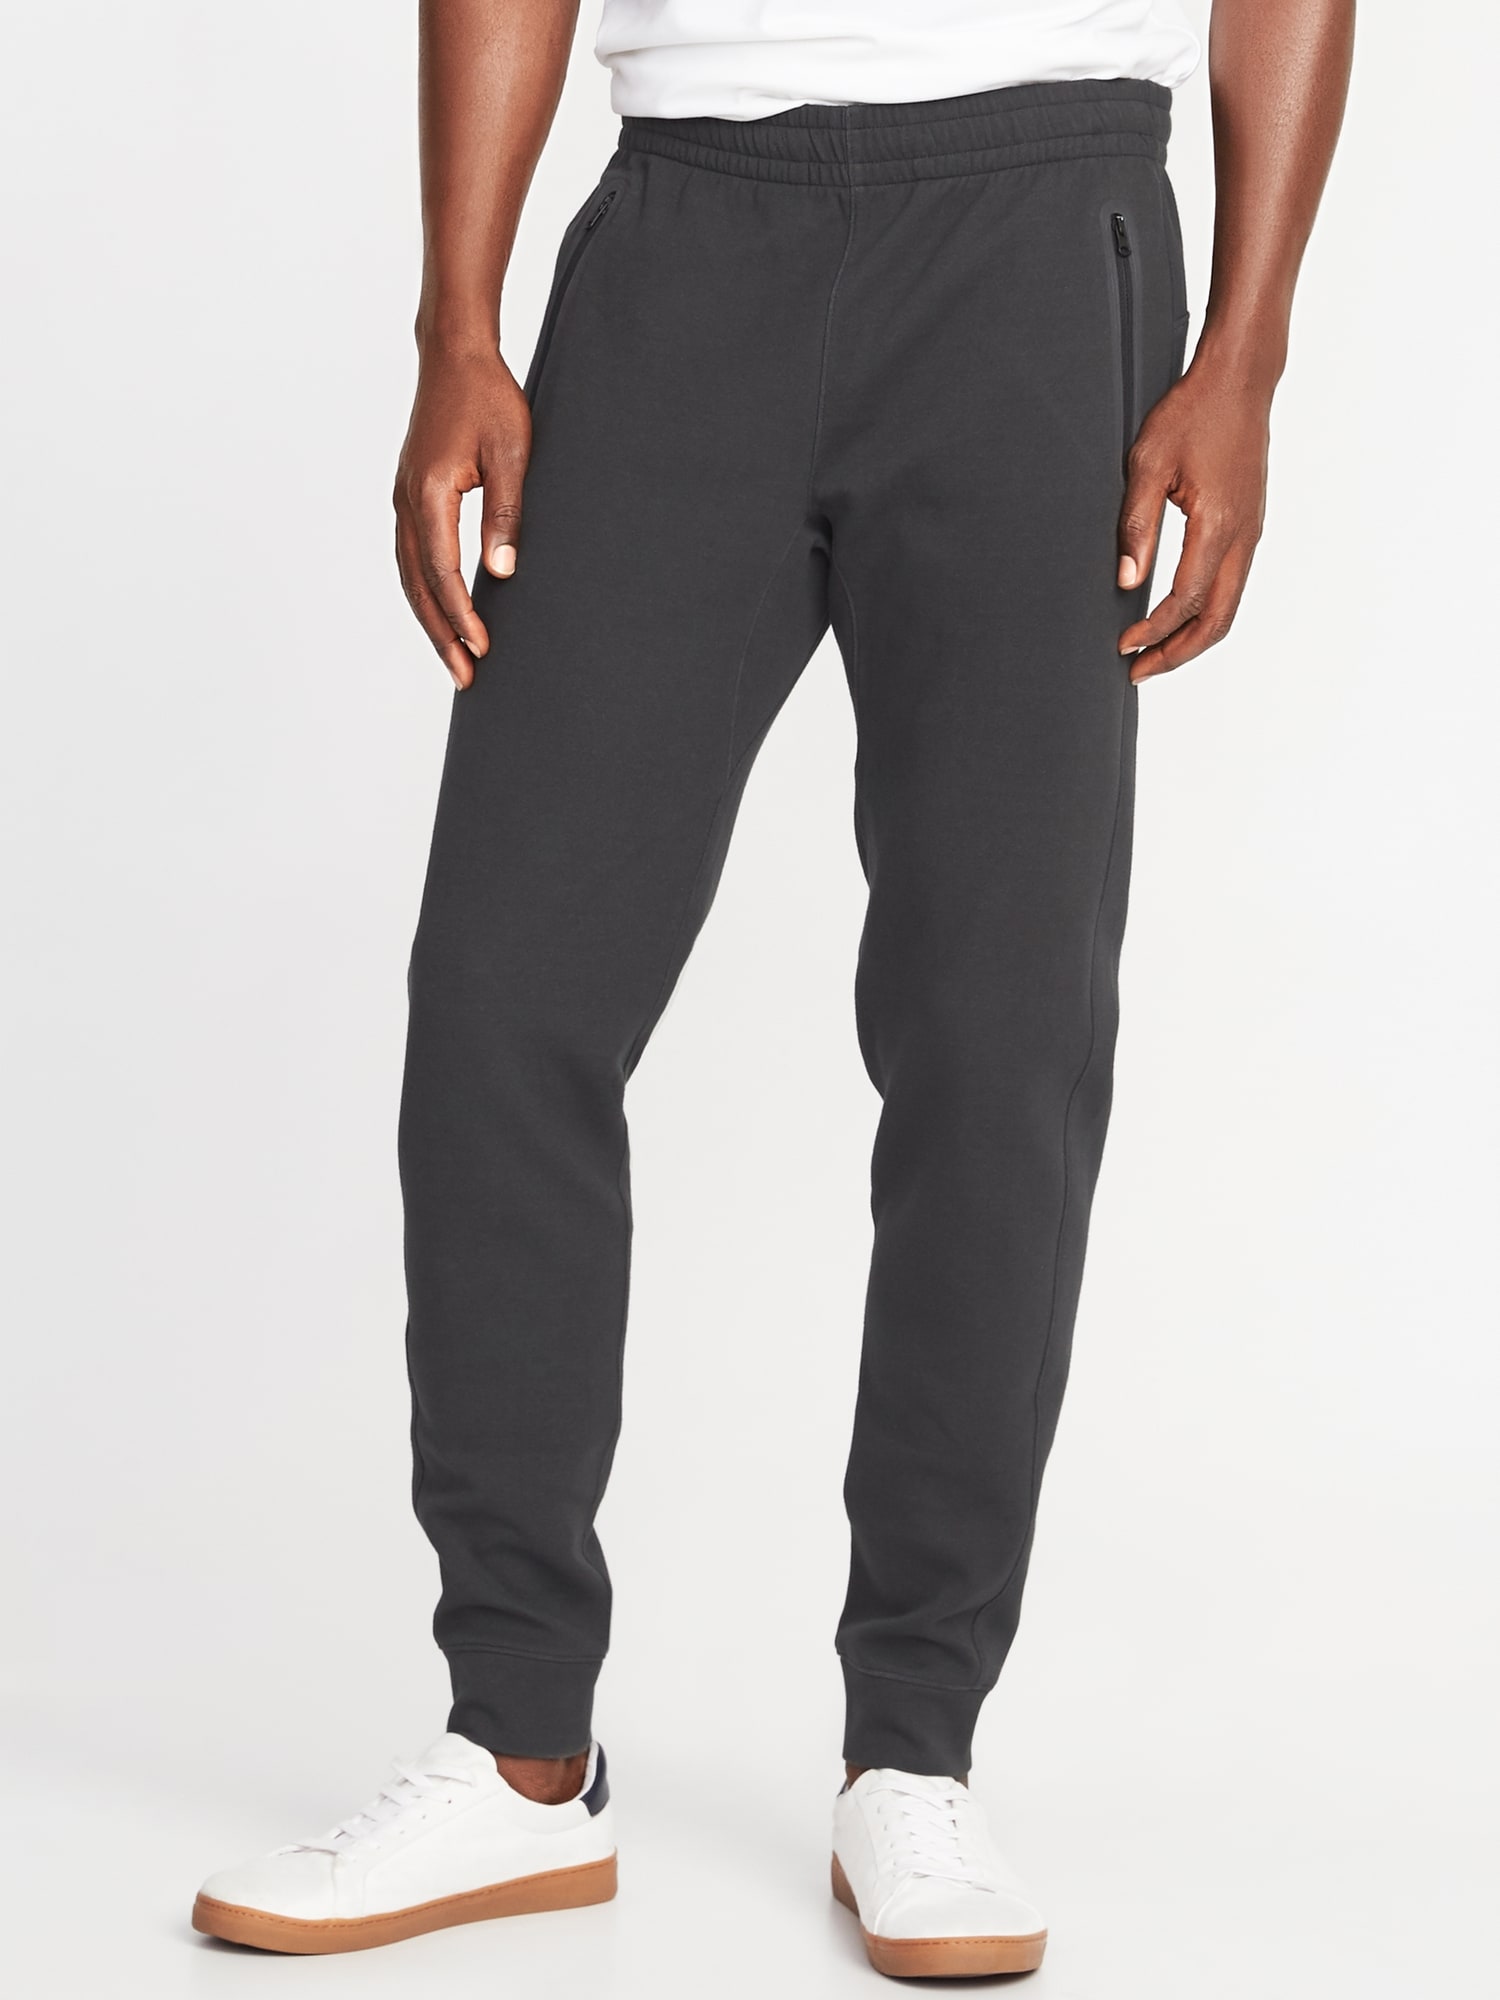 Old Navy Textured Dynamic Fleece Tapered Sweatpants